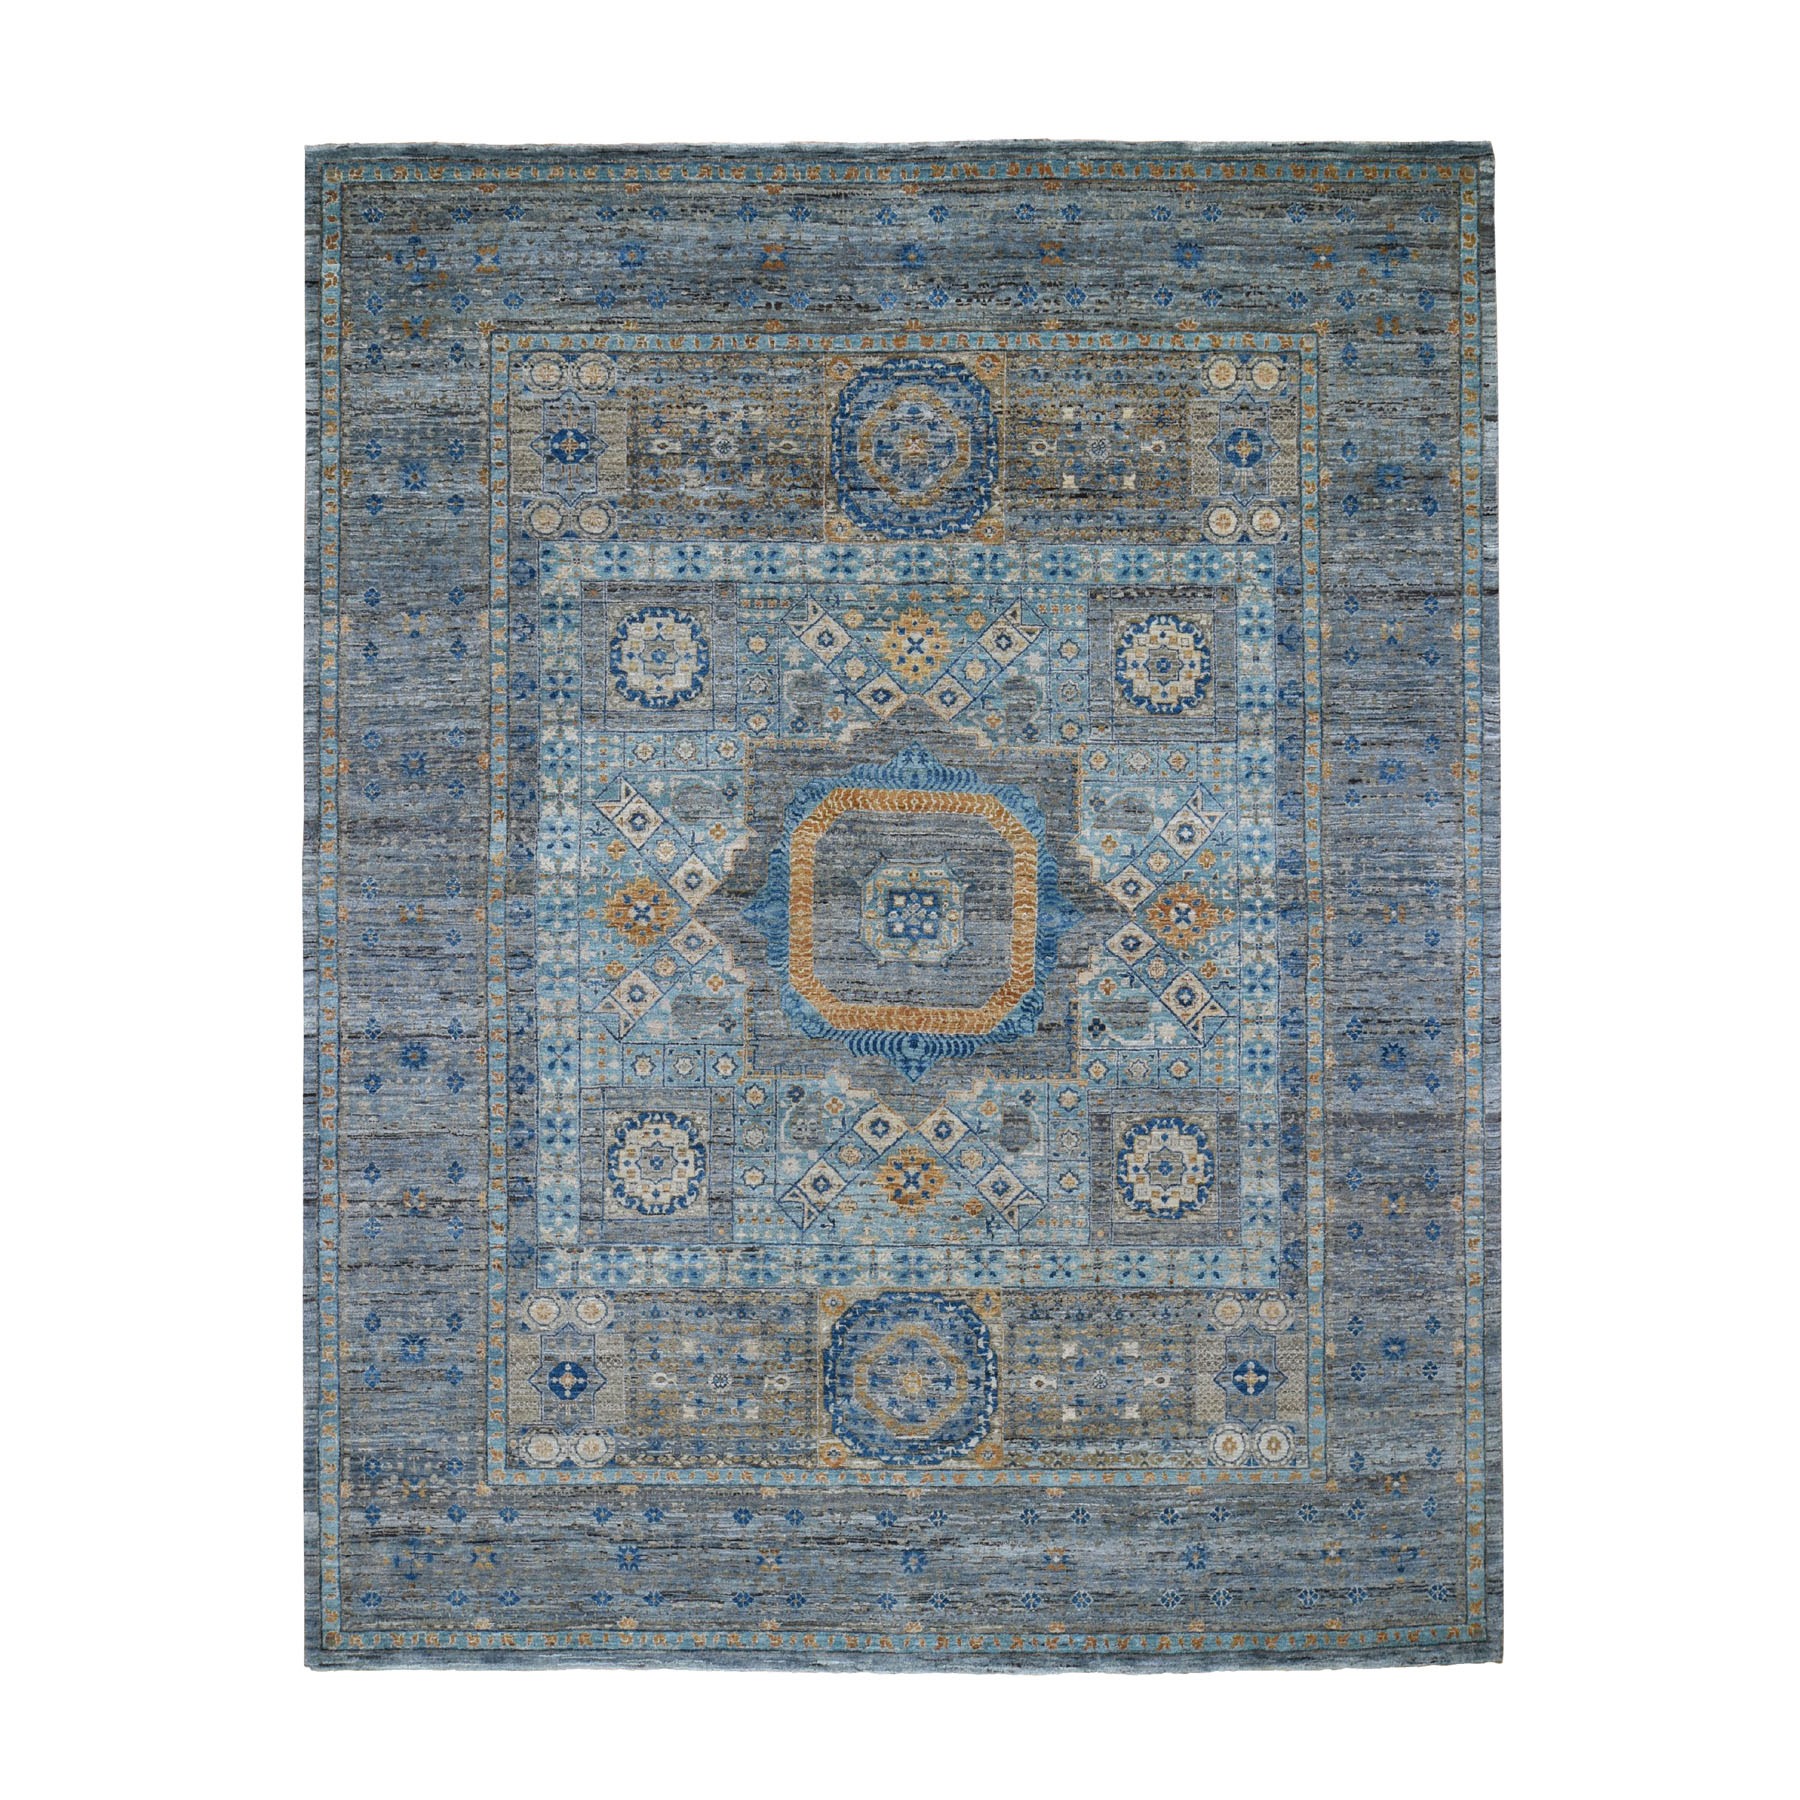 8'3"X10'2" Blue Pure Wool Mamluk Design Hand Knotted Oriental Rug moad89b0